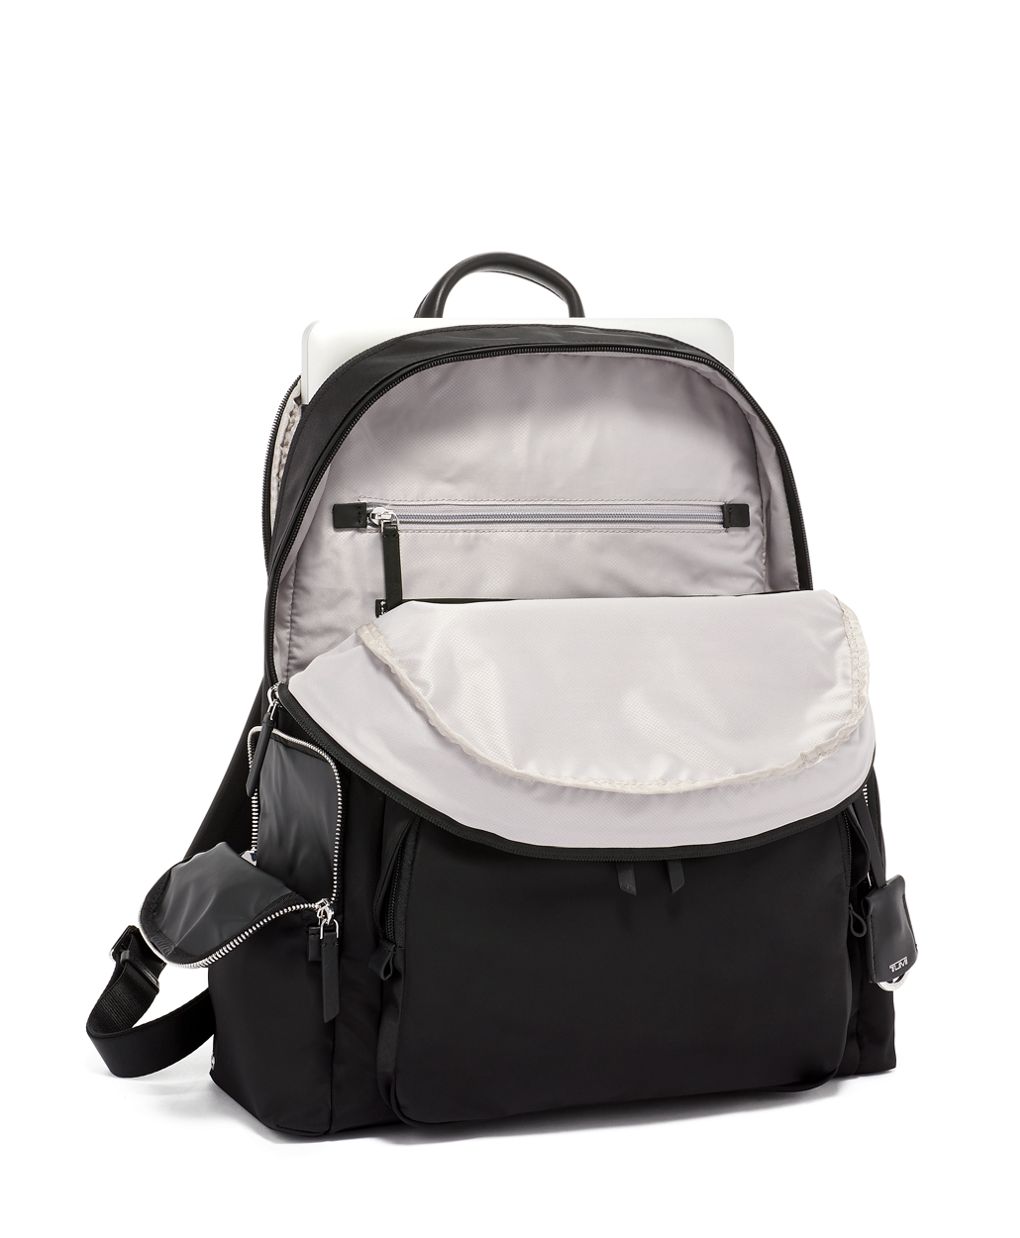 Black - Save 56% Tumi Synthetic Voyageur Carson Backpack in Black/Silver Womens Backpacks Tumi Backpacks 